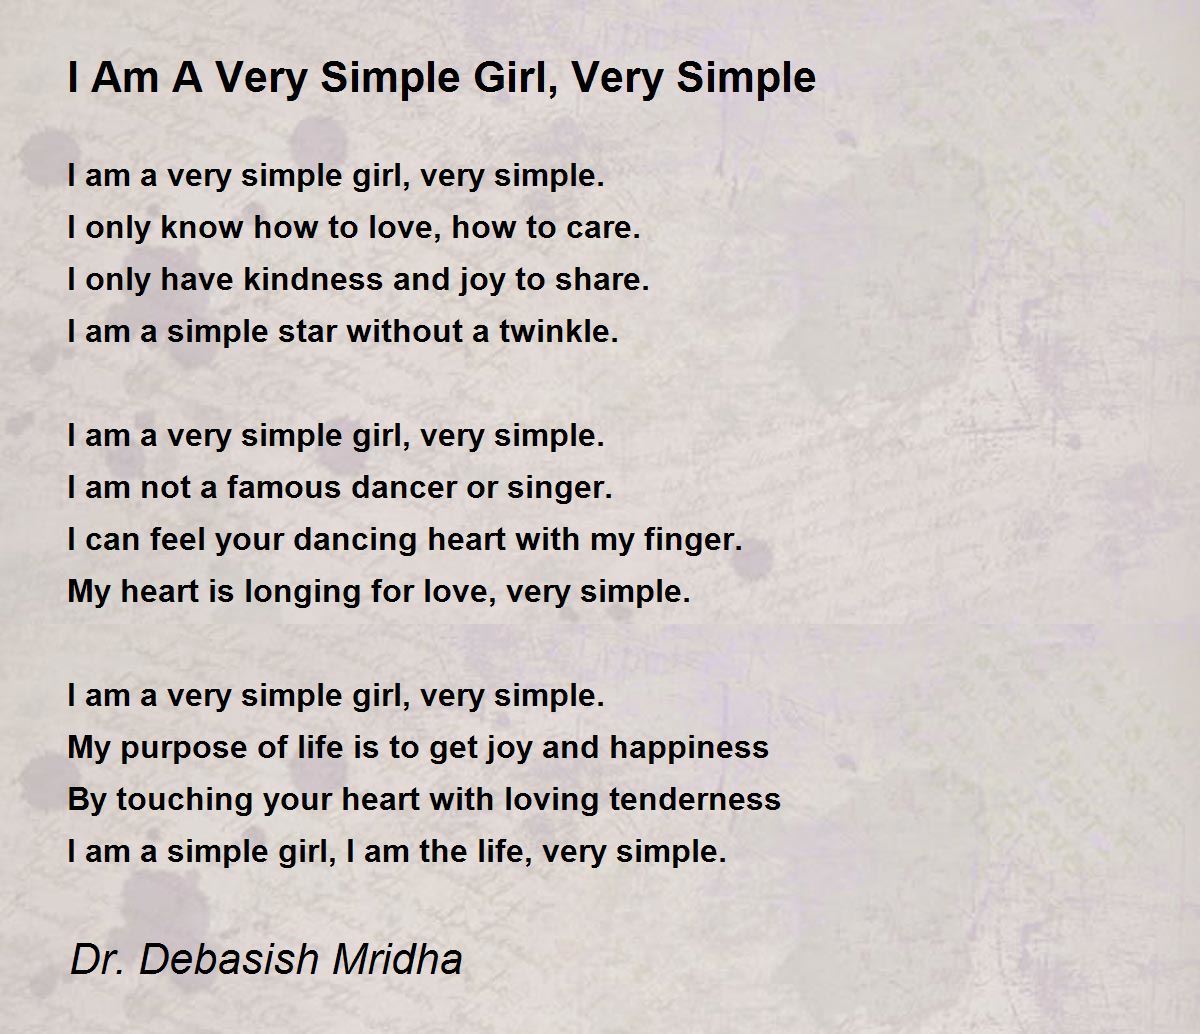 https://img.poemhunter.com/i/poem_images/354/i-am-a-very-simple-girl-very-simple.jpg